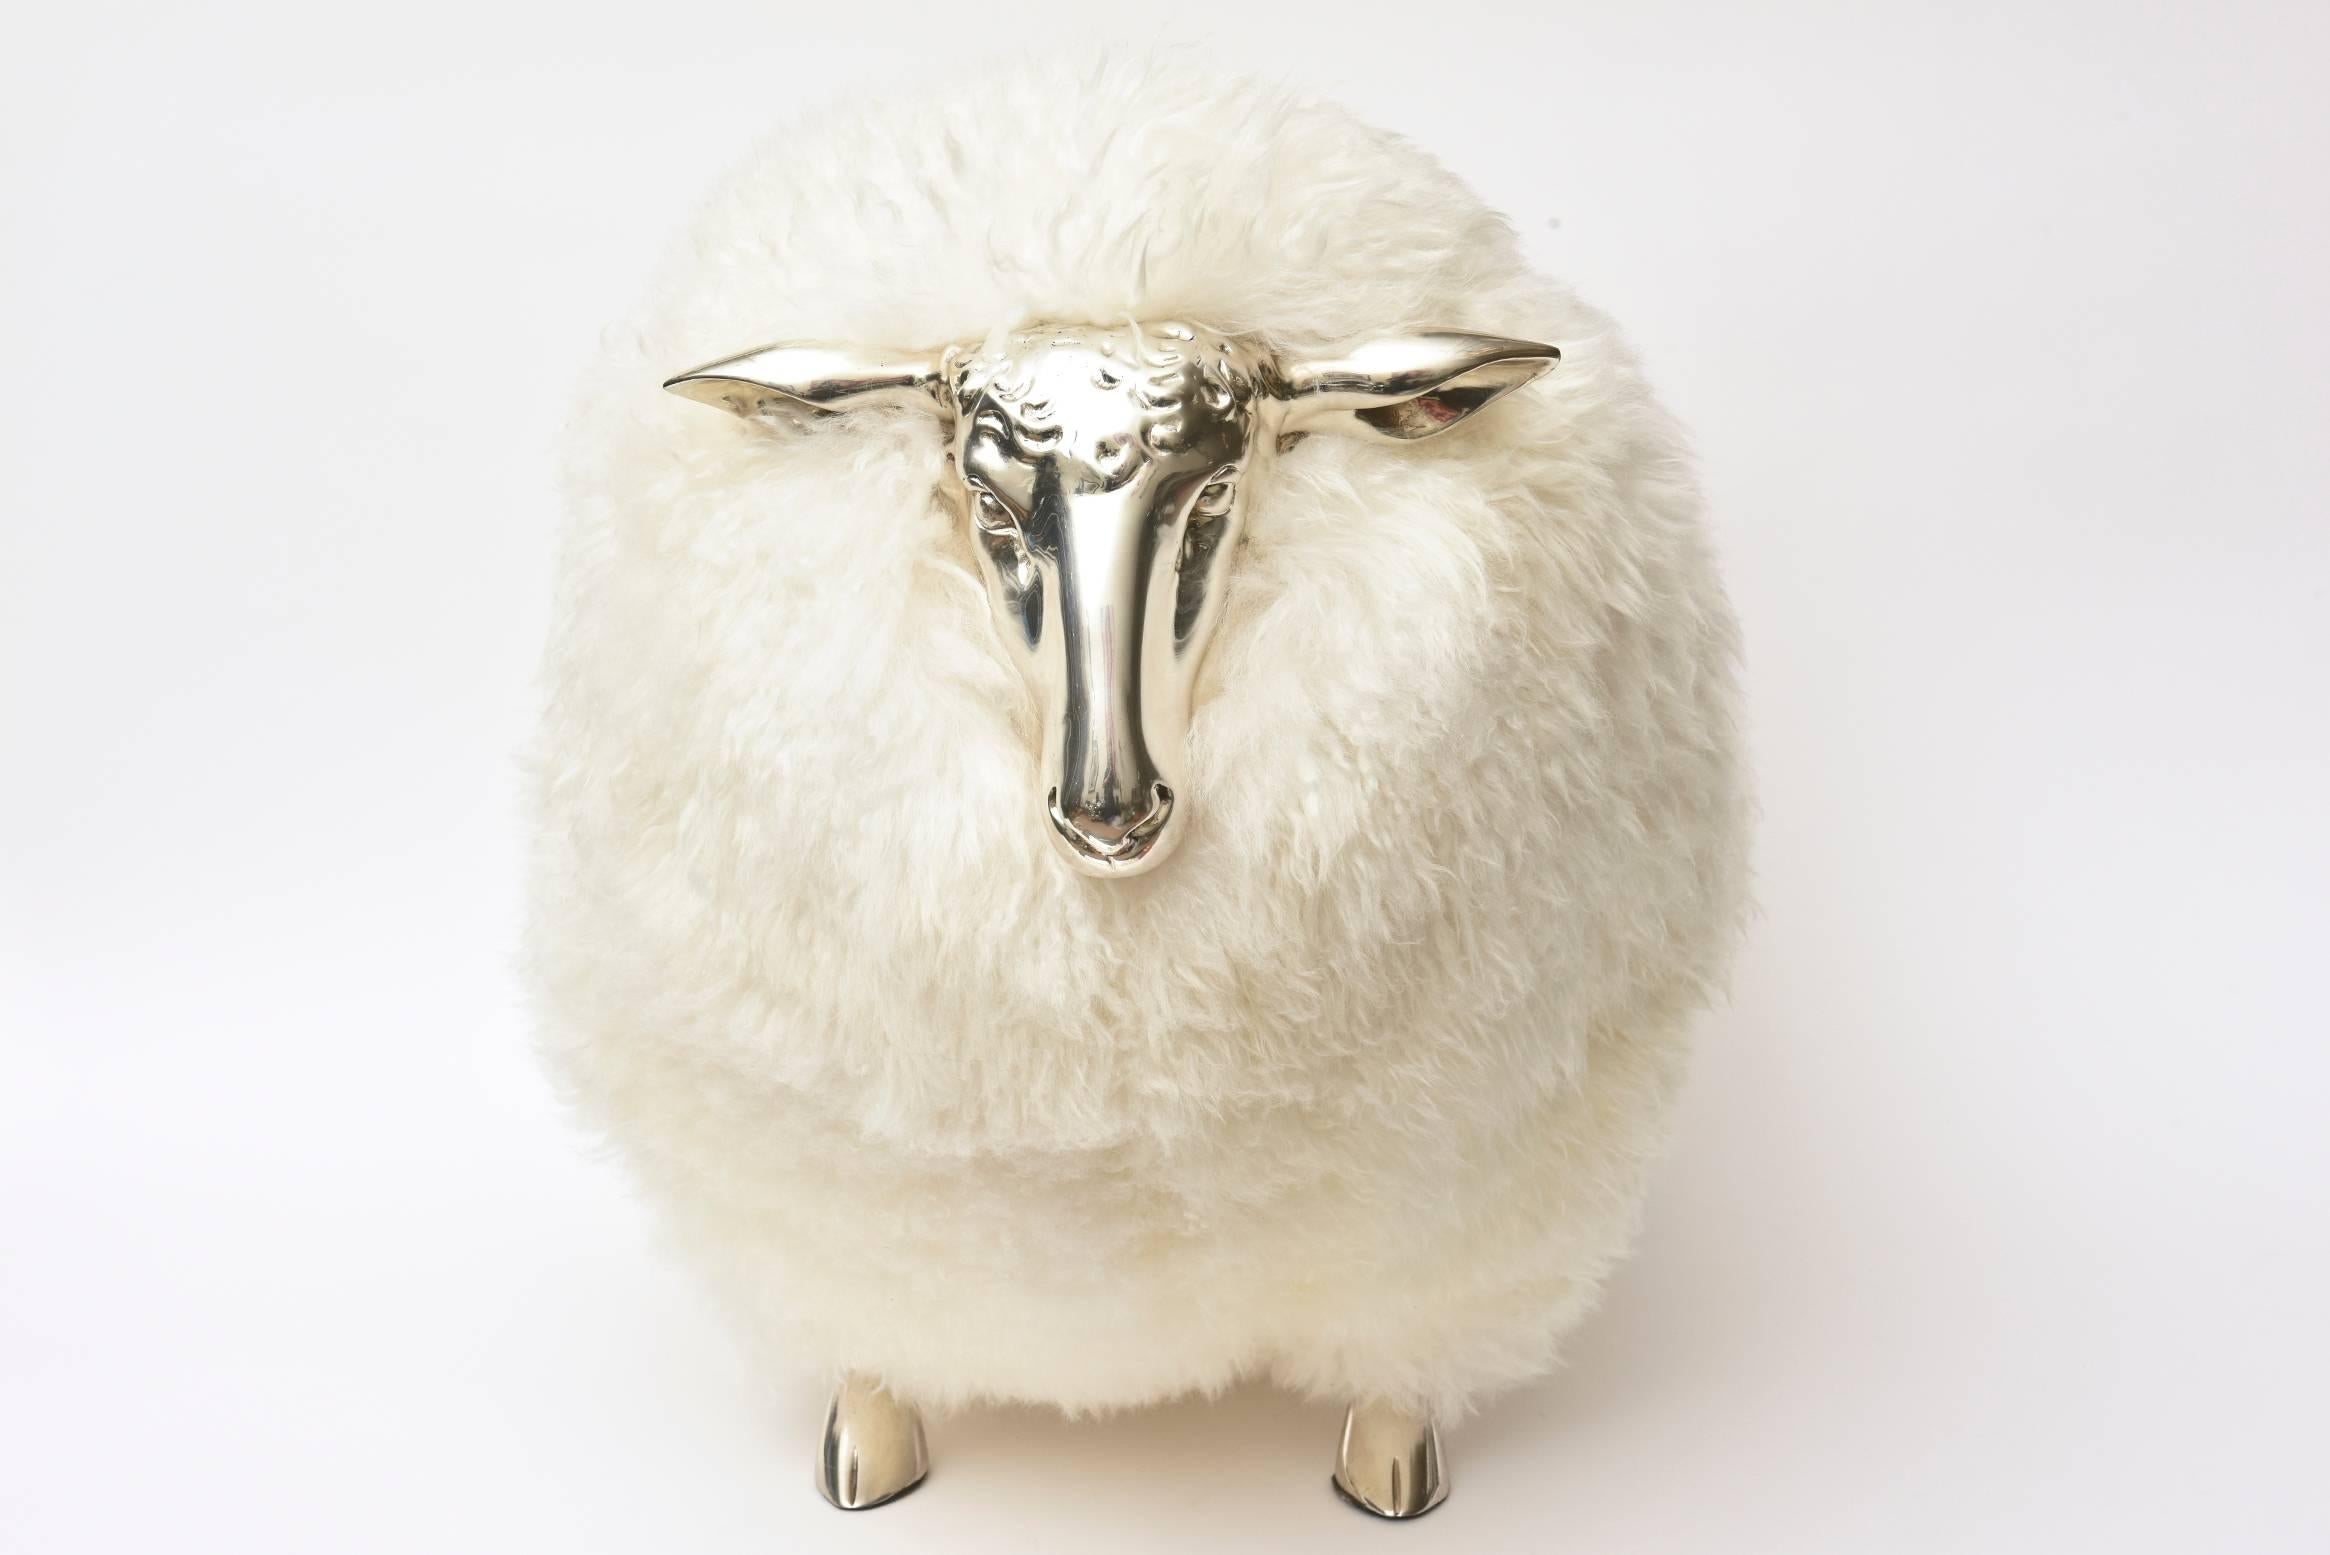 This sculptural French sheep bench or ottoman is off-white shearling and nickel silver as the face and hoof legs. This is called new old stock. It was made then and placed in a warehouse in France and not seen again until recently. This particular